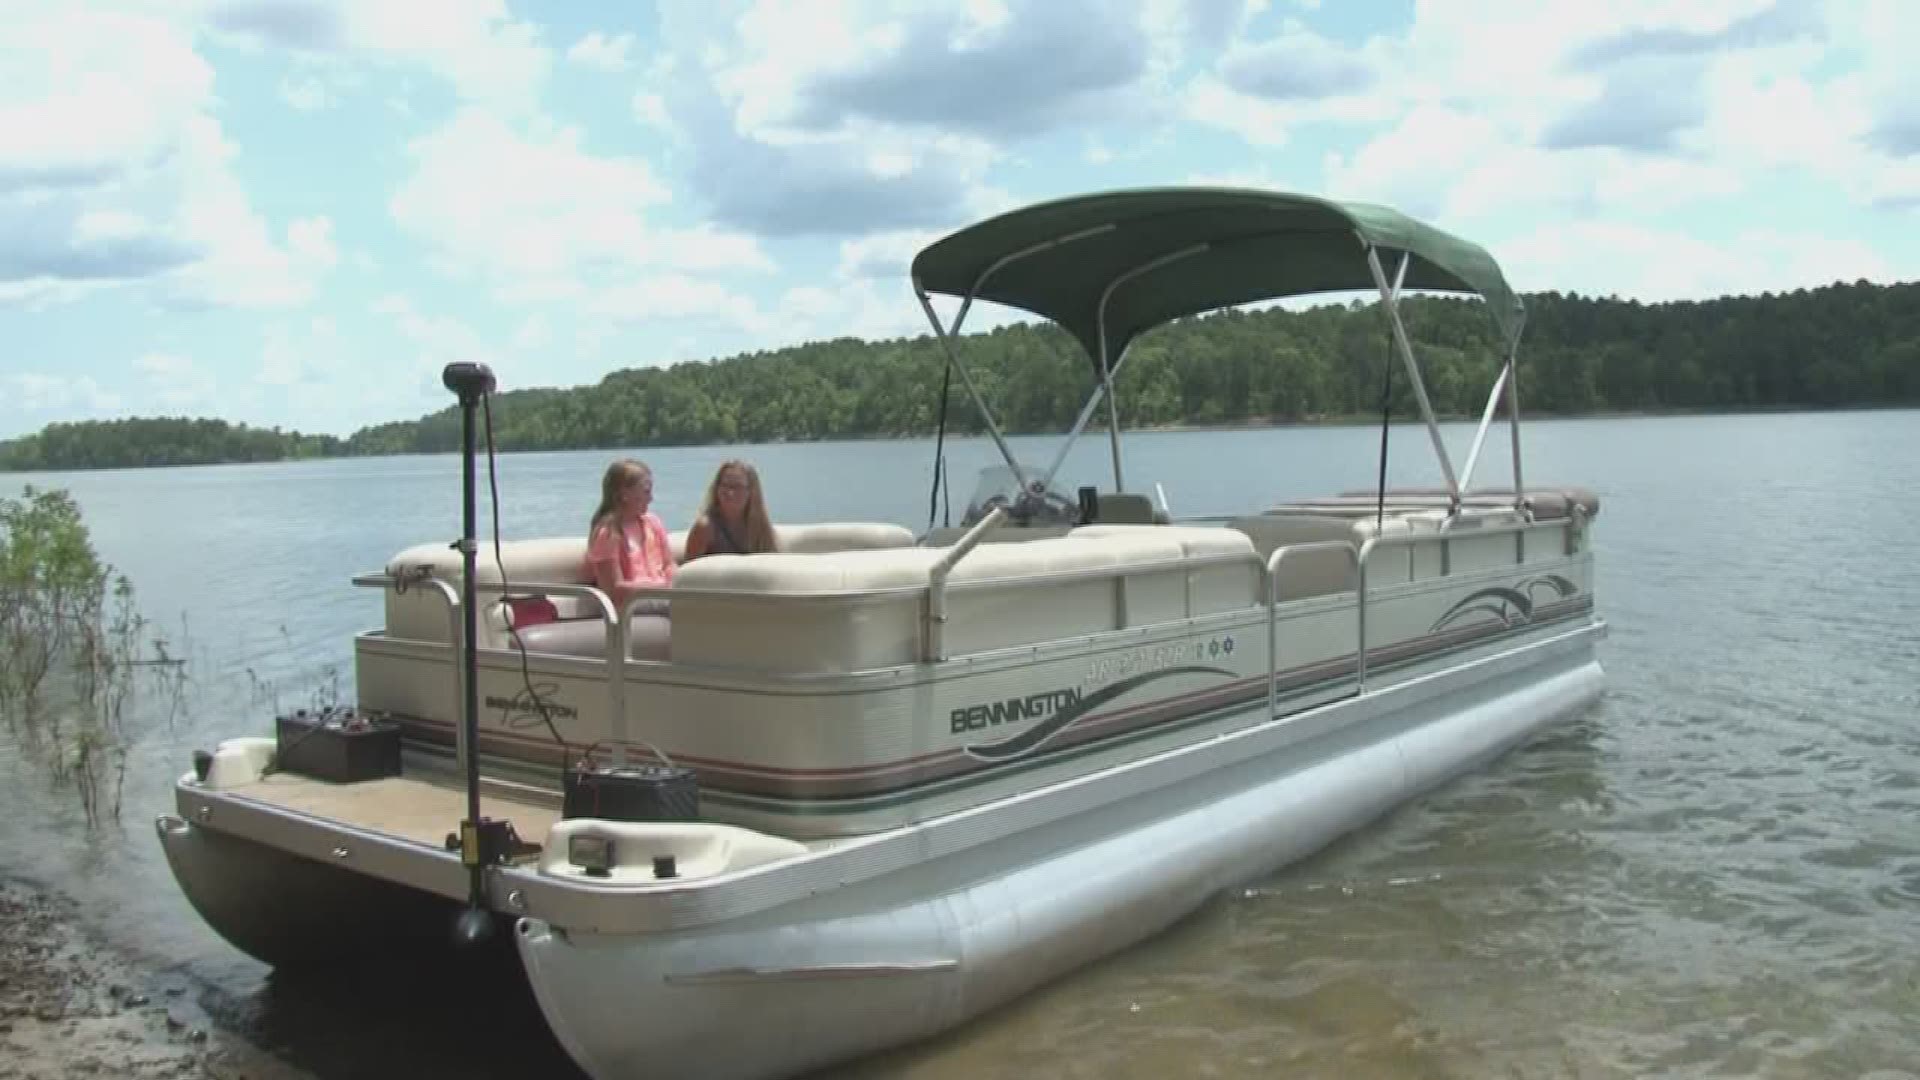 The accident happened during a family outing here on DeGray Lake on Sunday, July 1.